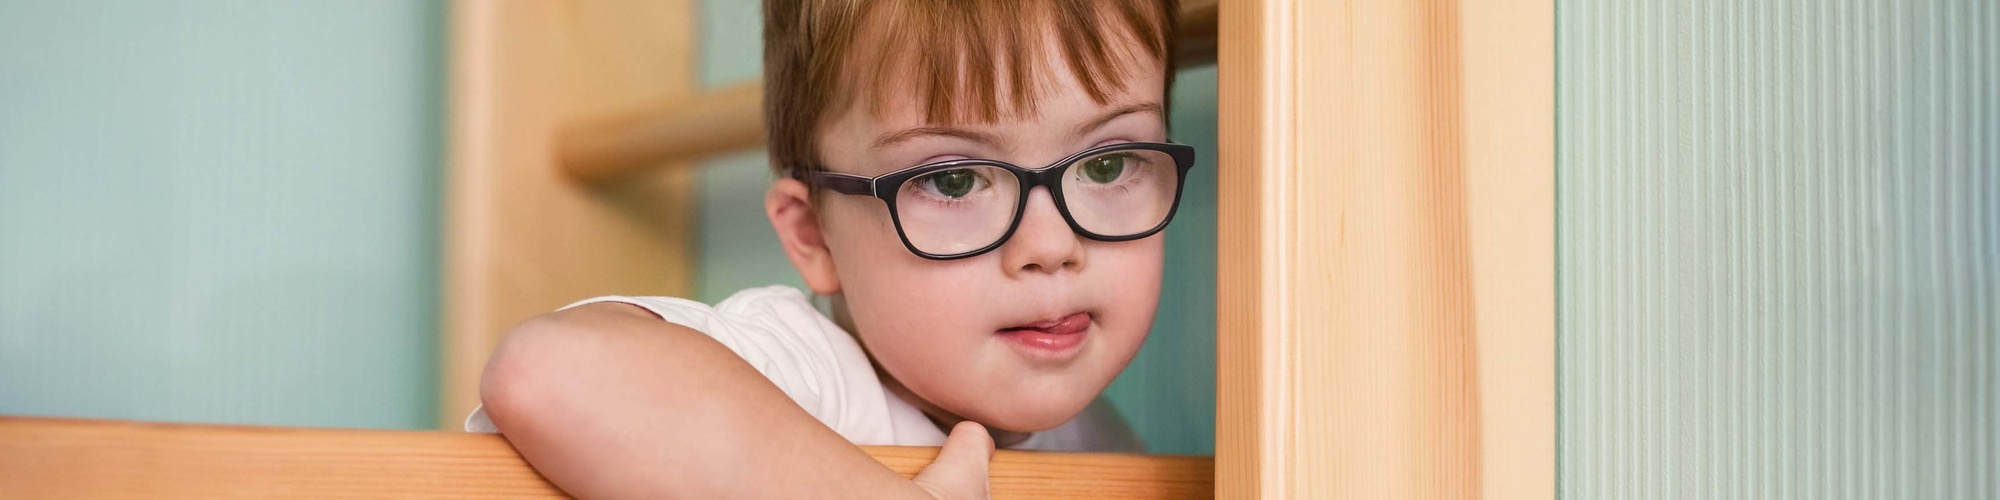 Child with glasses and white shirt on wooden ladder.